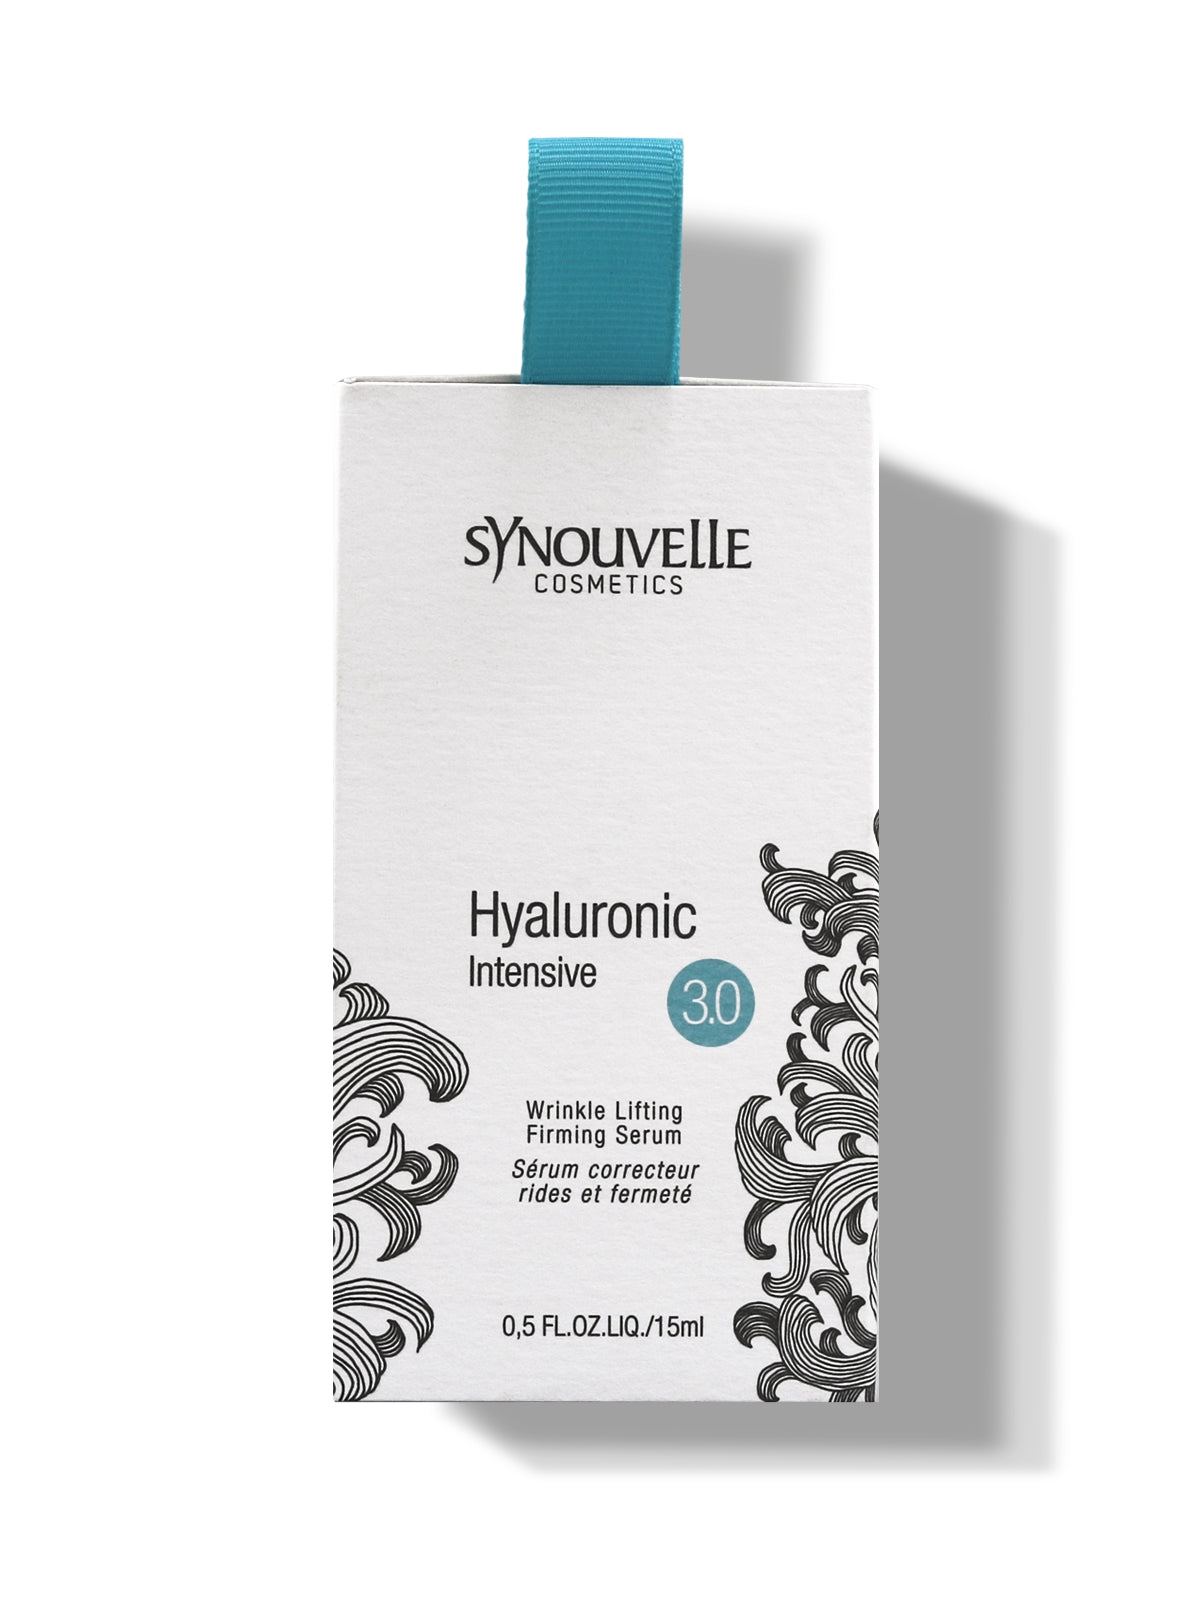 Hyaluronic Intensive 3.0 